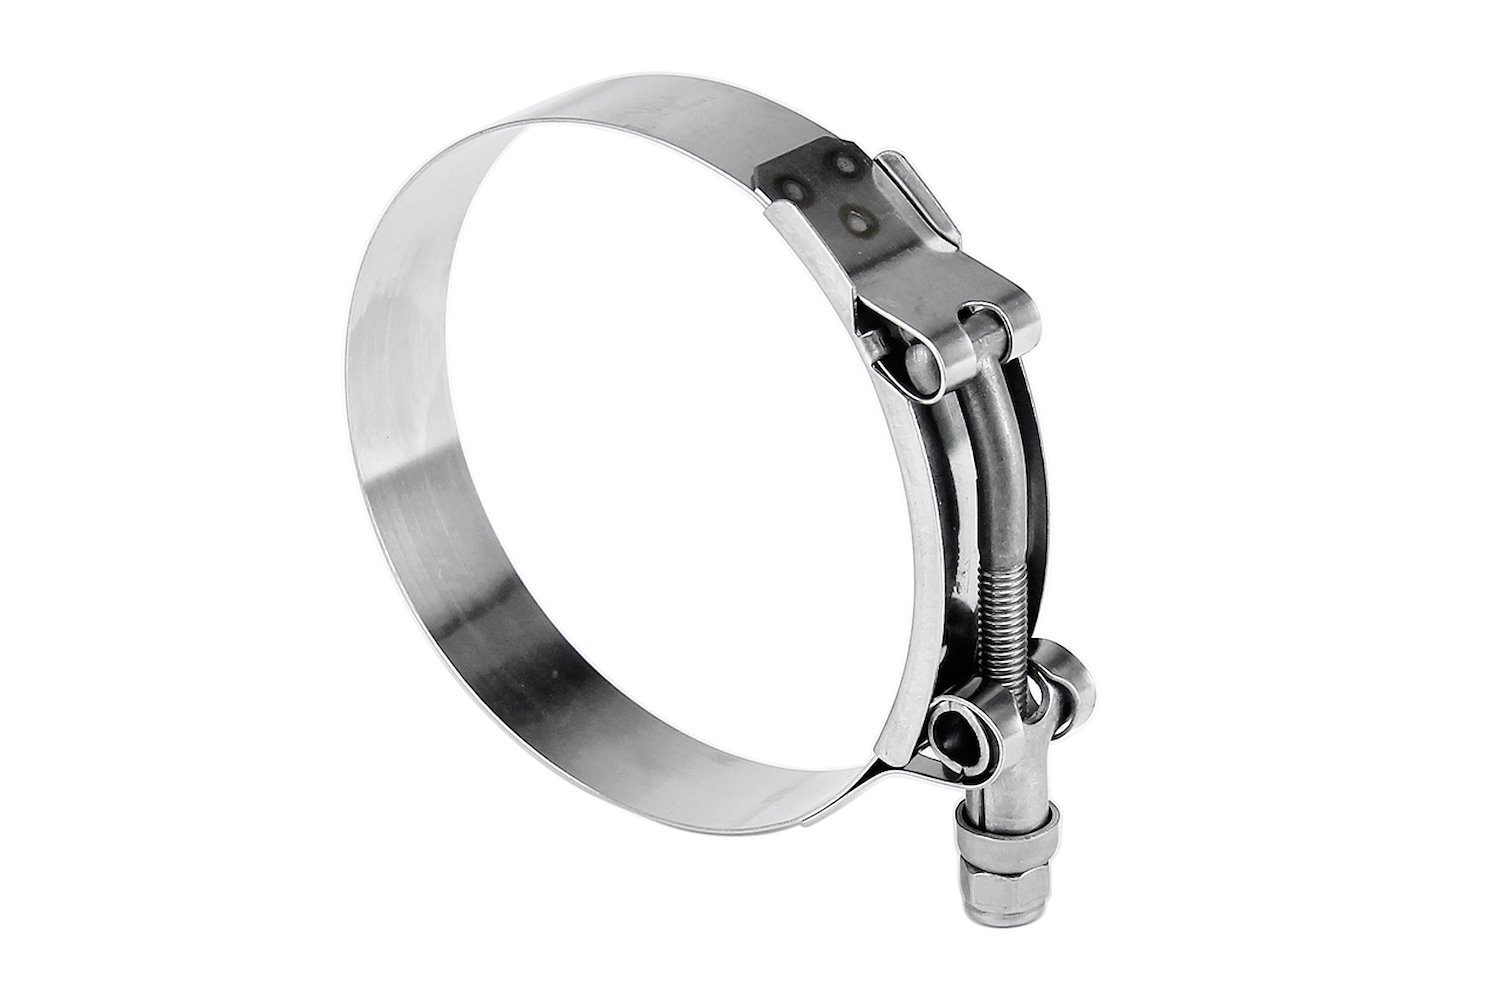 316-SSTC-100-108 100-Percent Marine Grade Stainless Steel T-Bolt Hose Clamp, Size #100, Range: 3.93 in.- 4.25 in.